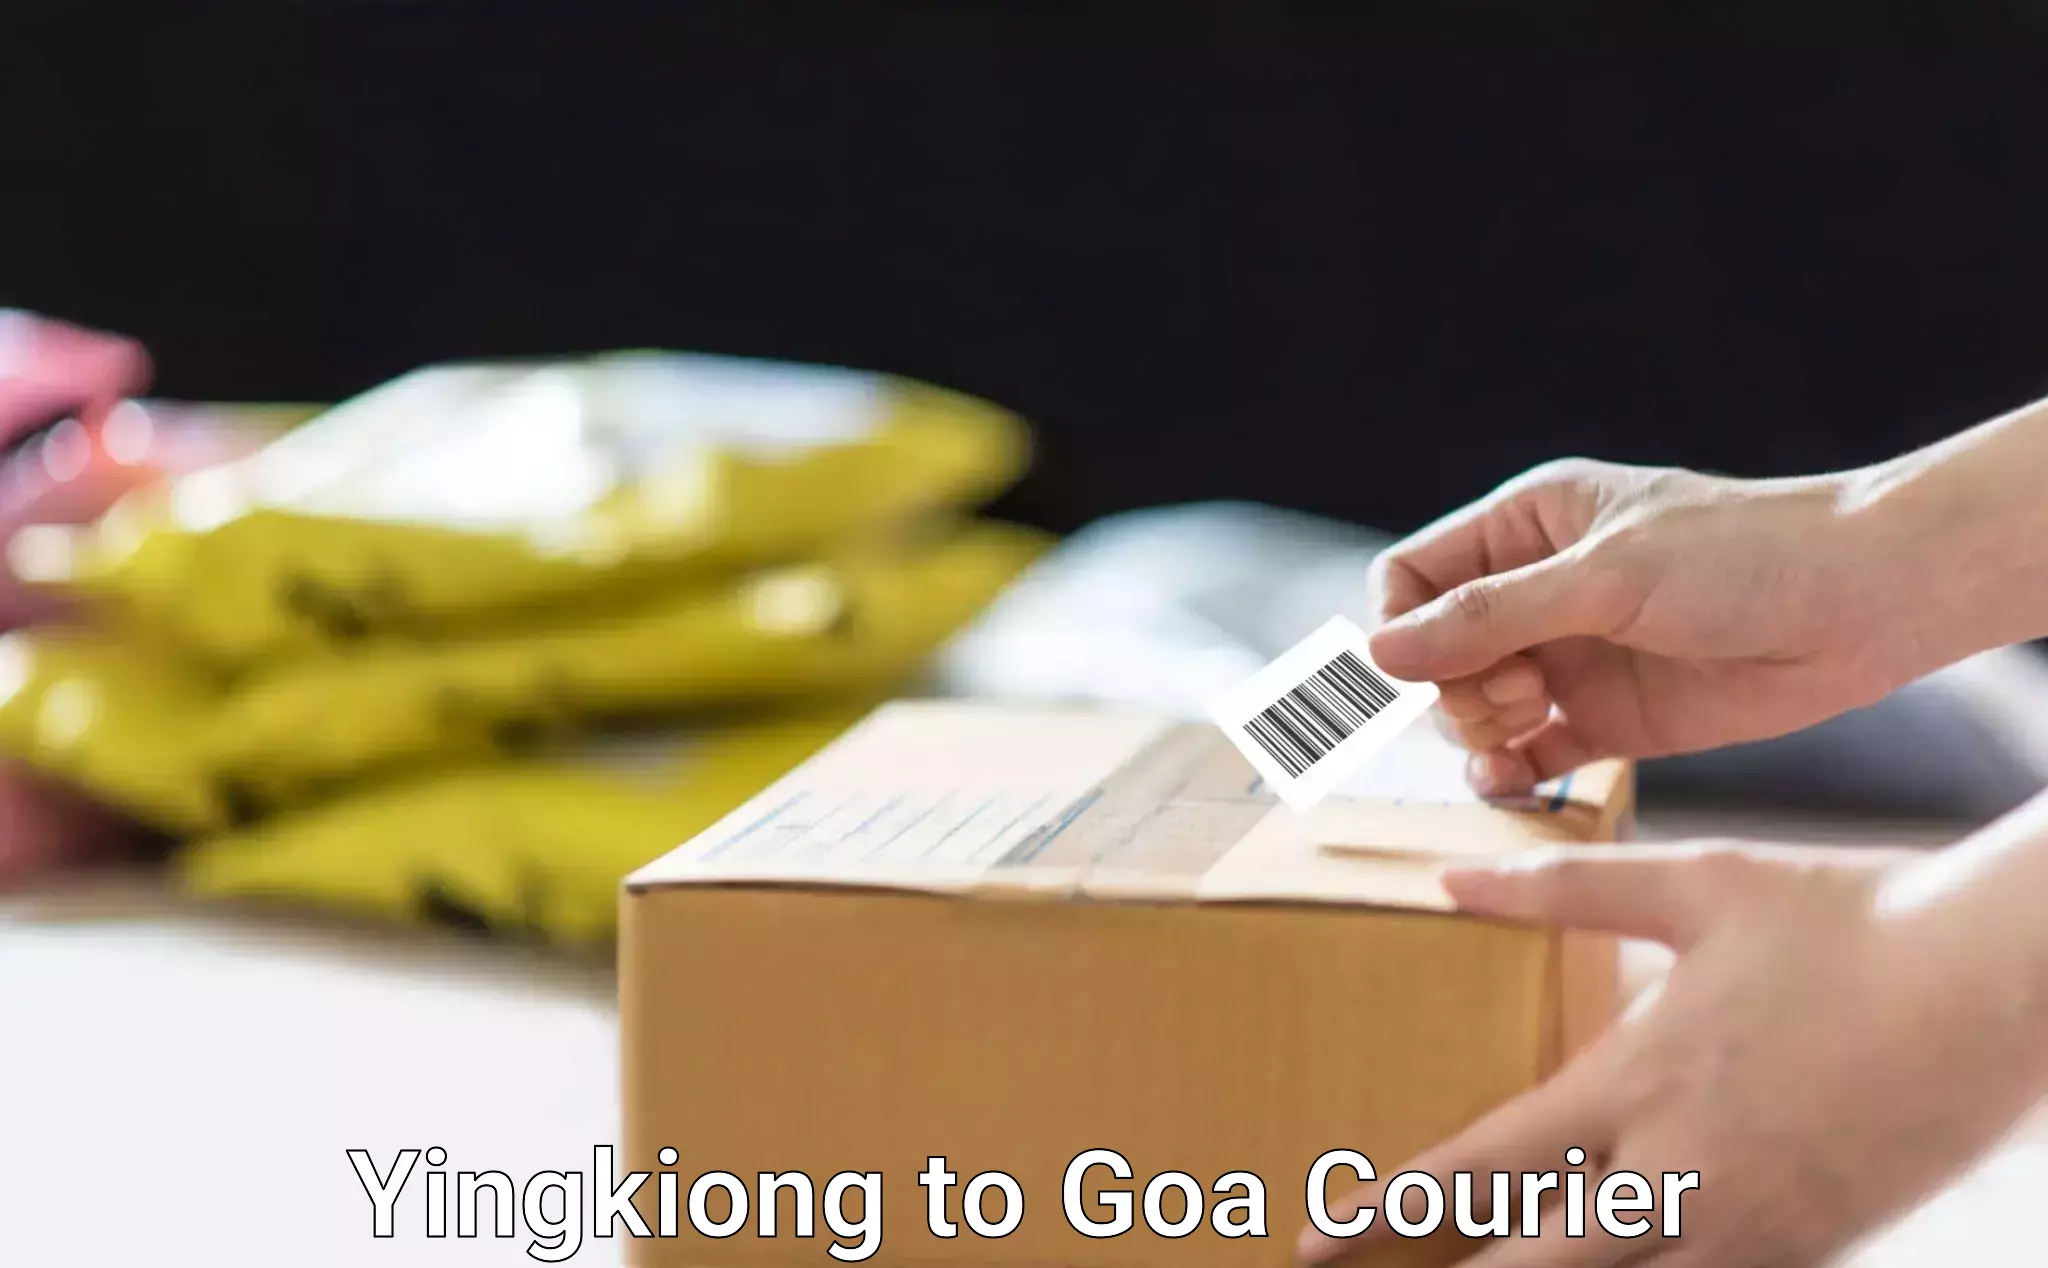 Overnight delivery in Yingkiong to South Goa